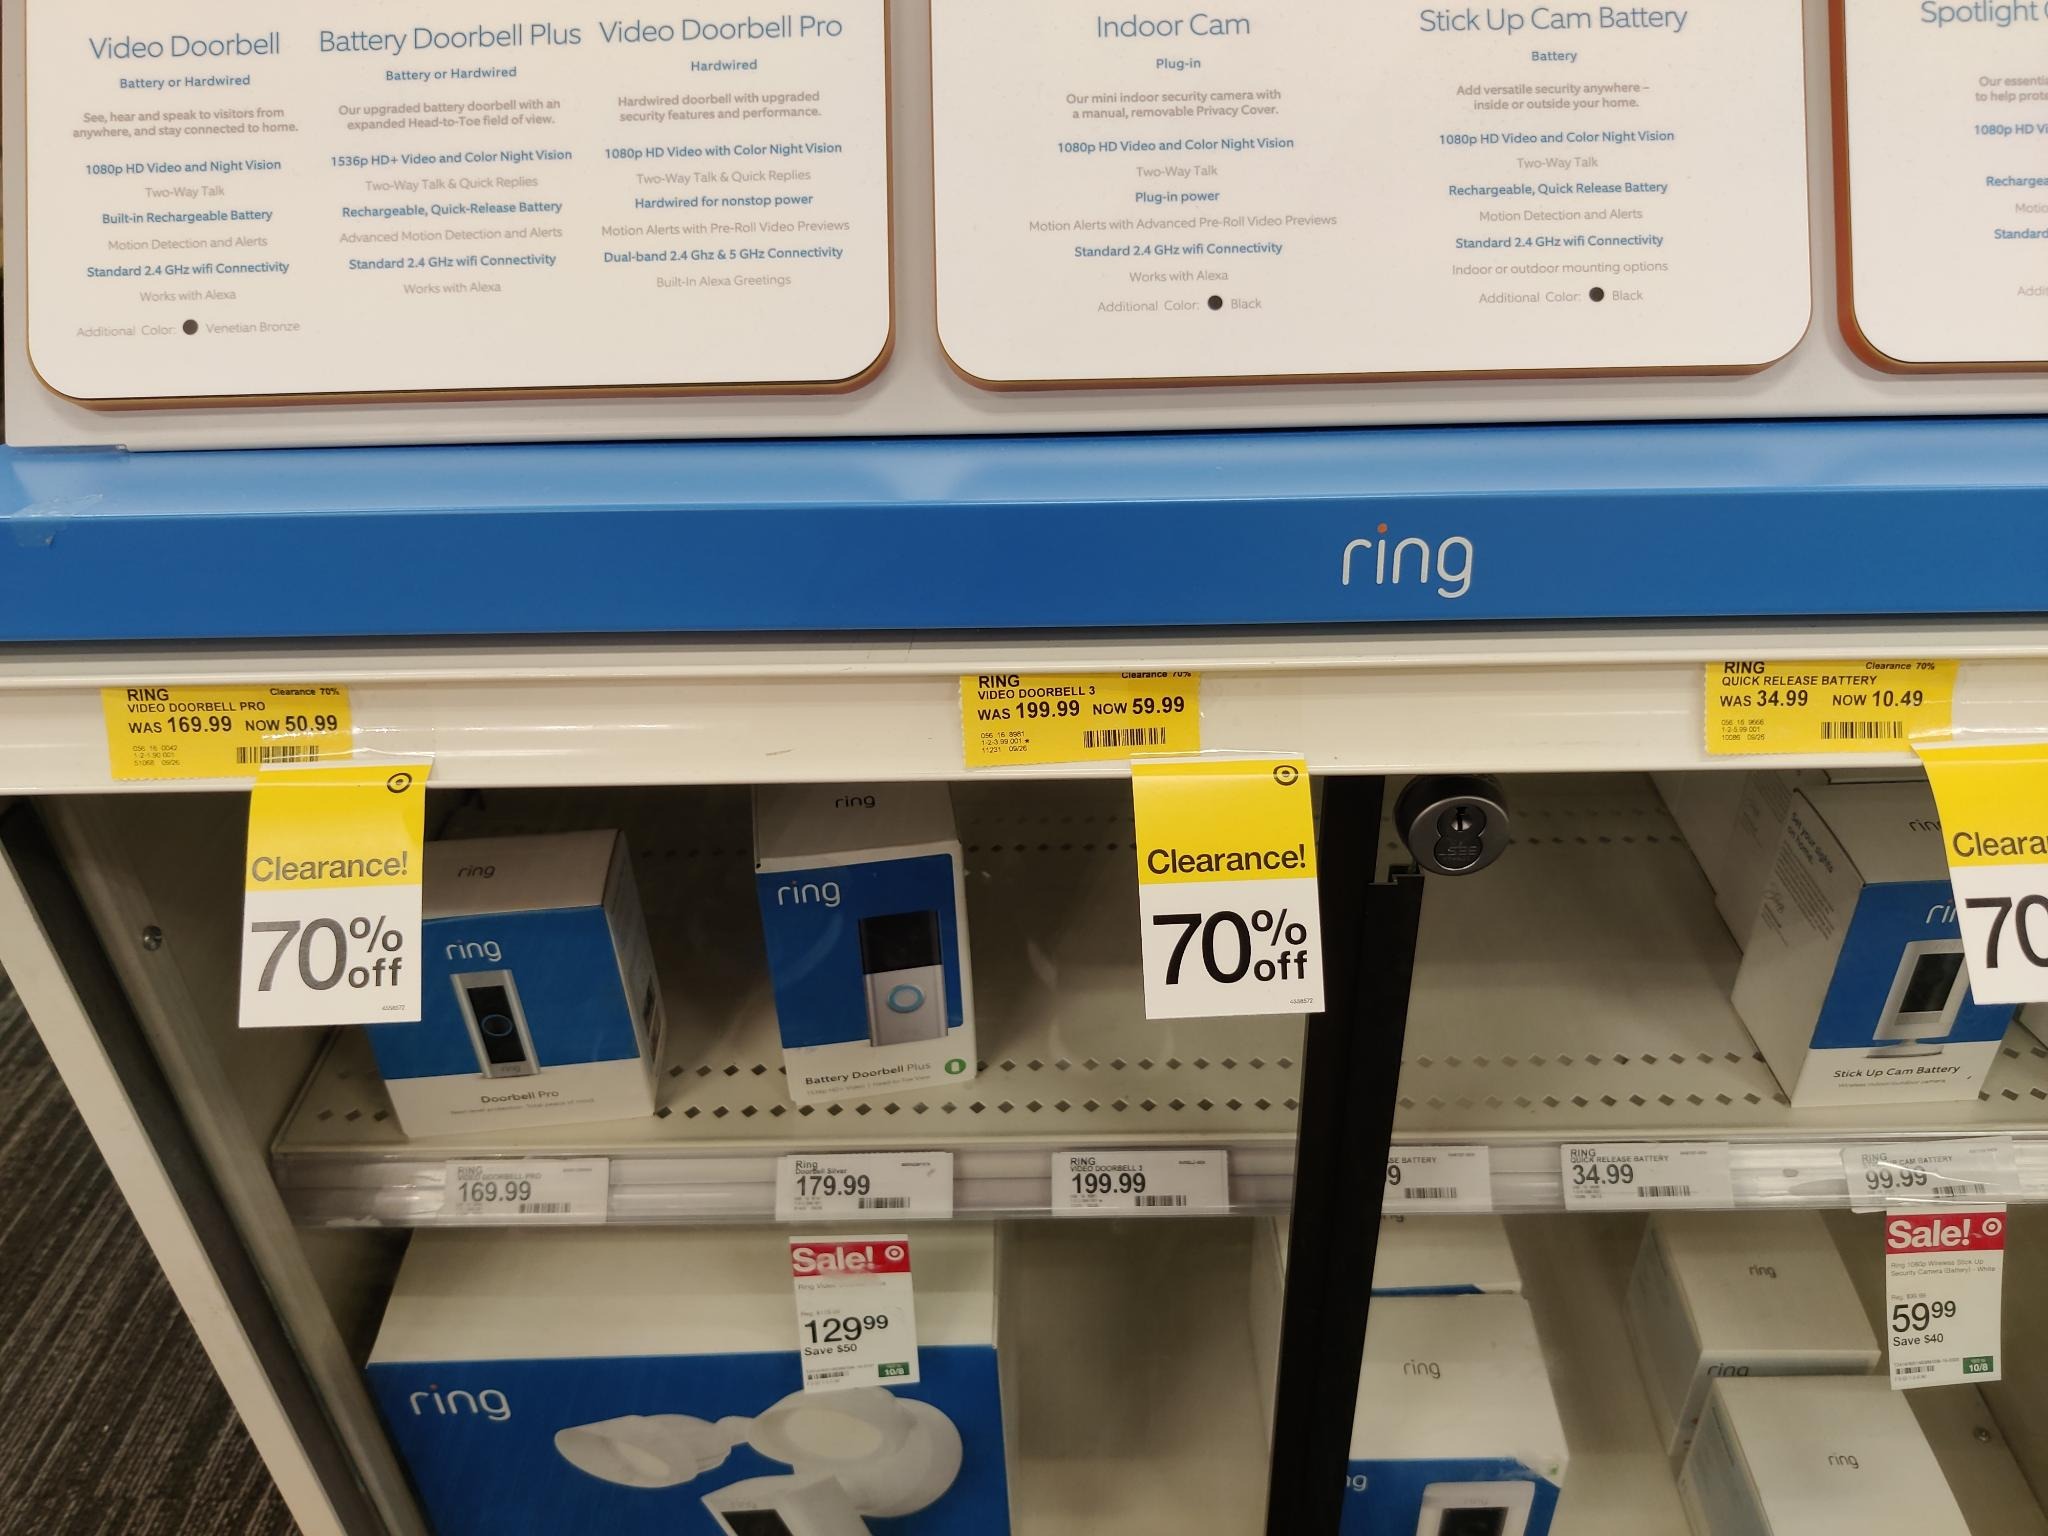 Ring 1080p Wireless Video Doorbell 3 $59.99 - Target in-store ONLY YMMV